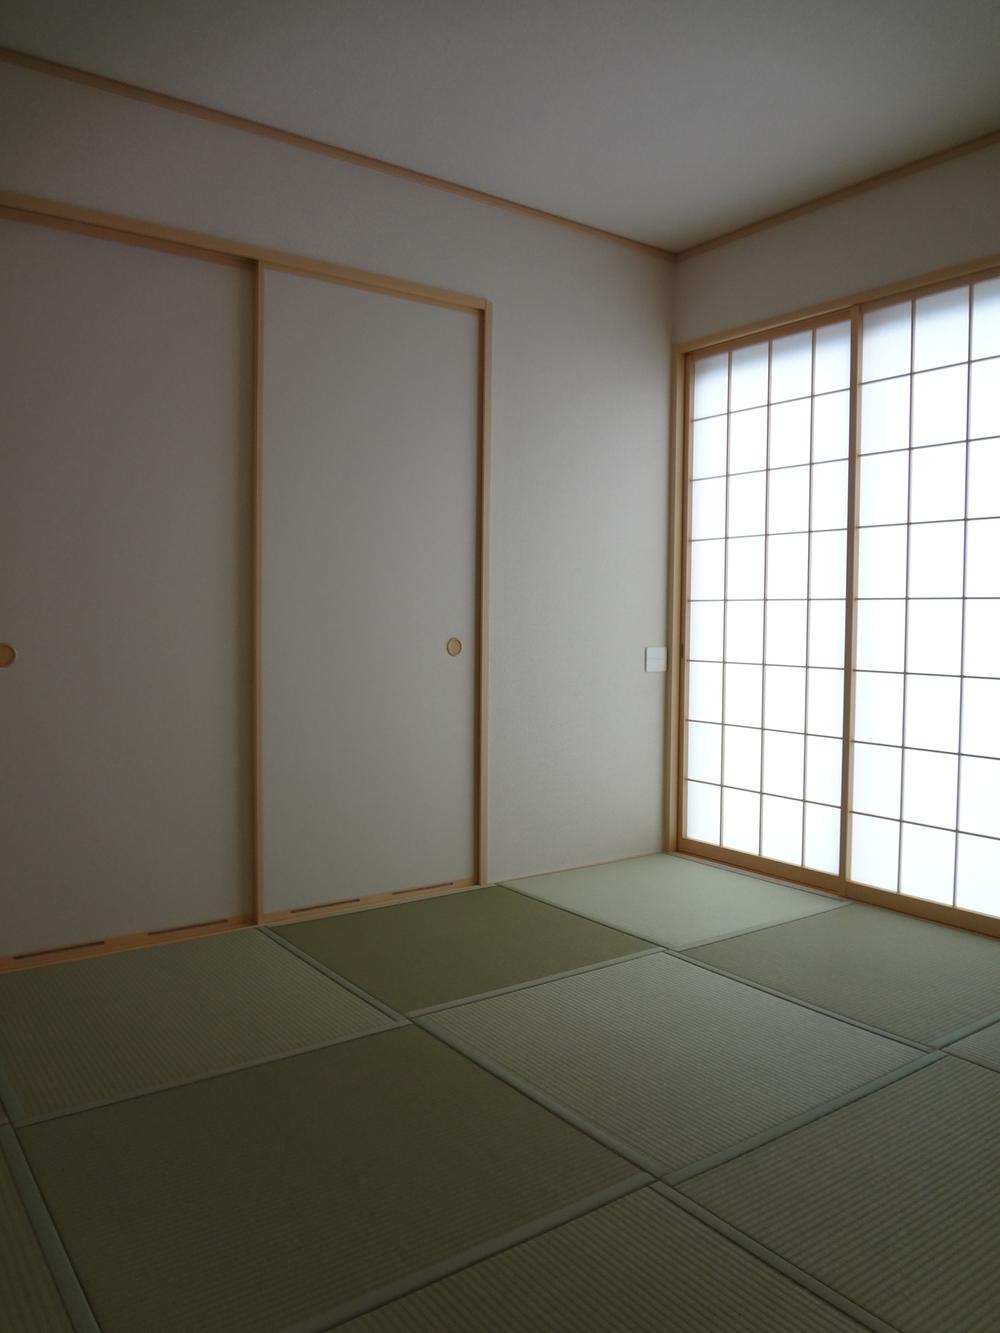 Other introspection. Japanese-style construction example photo 